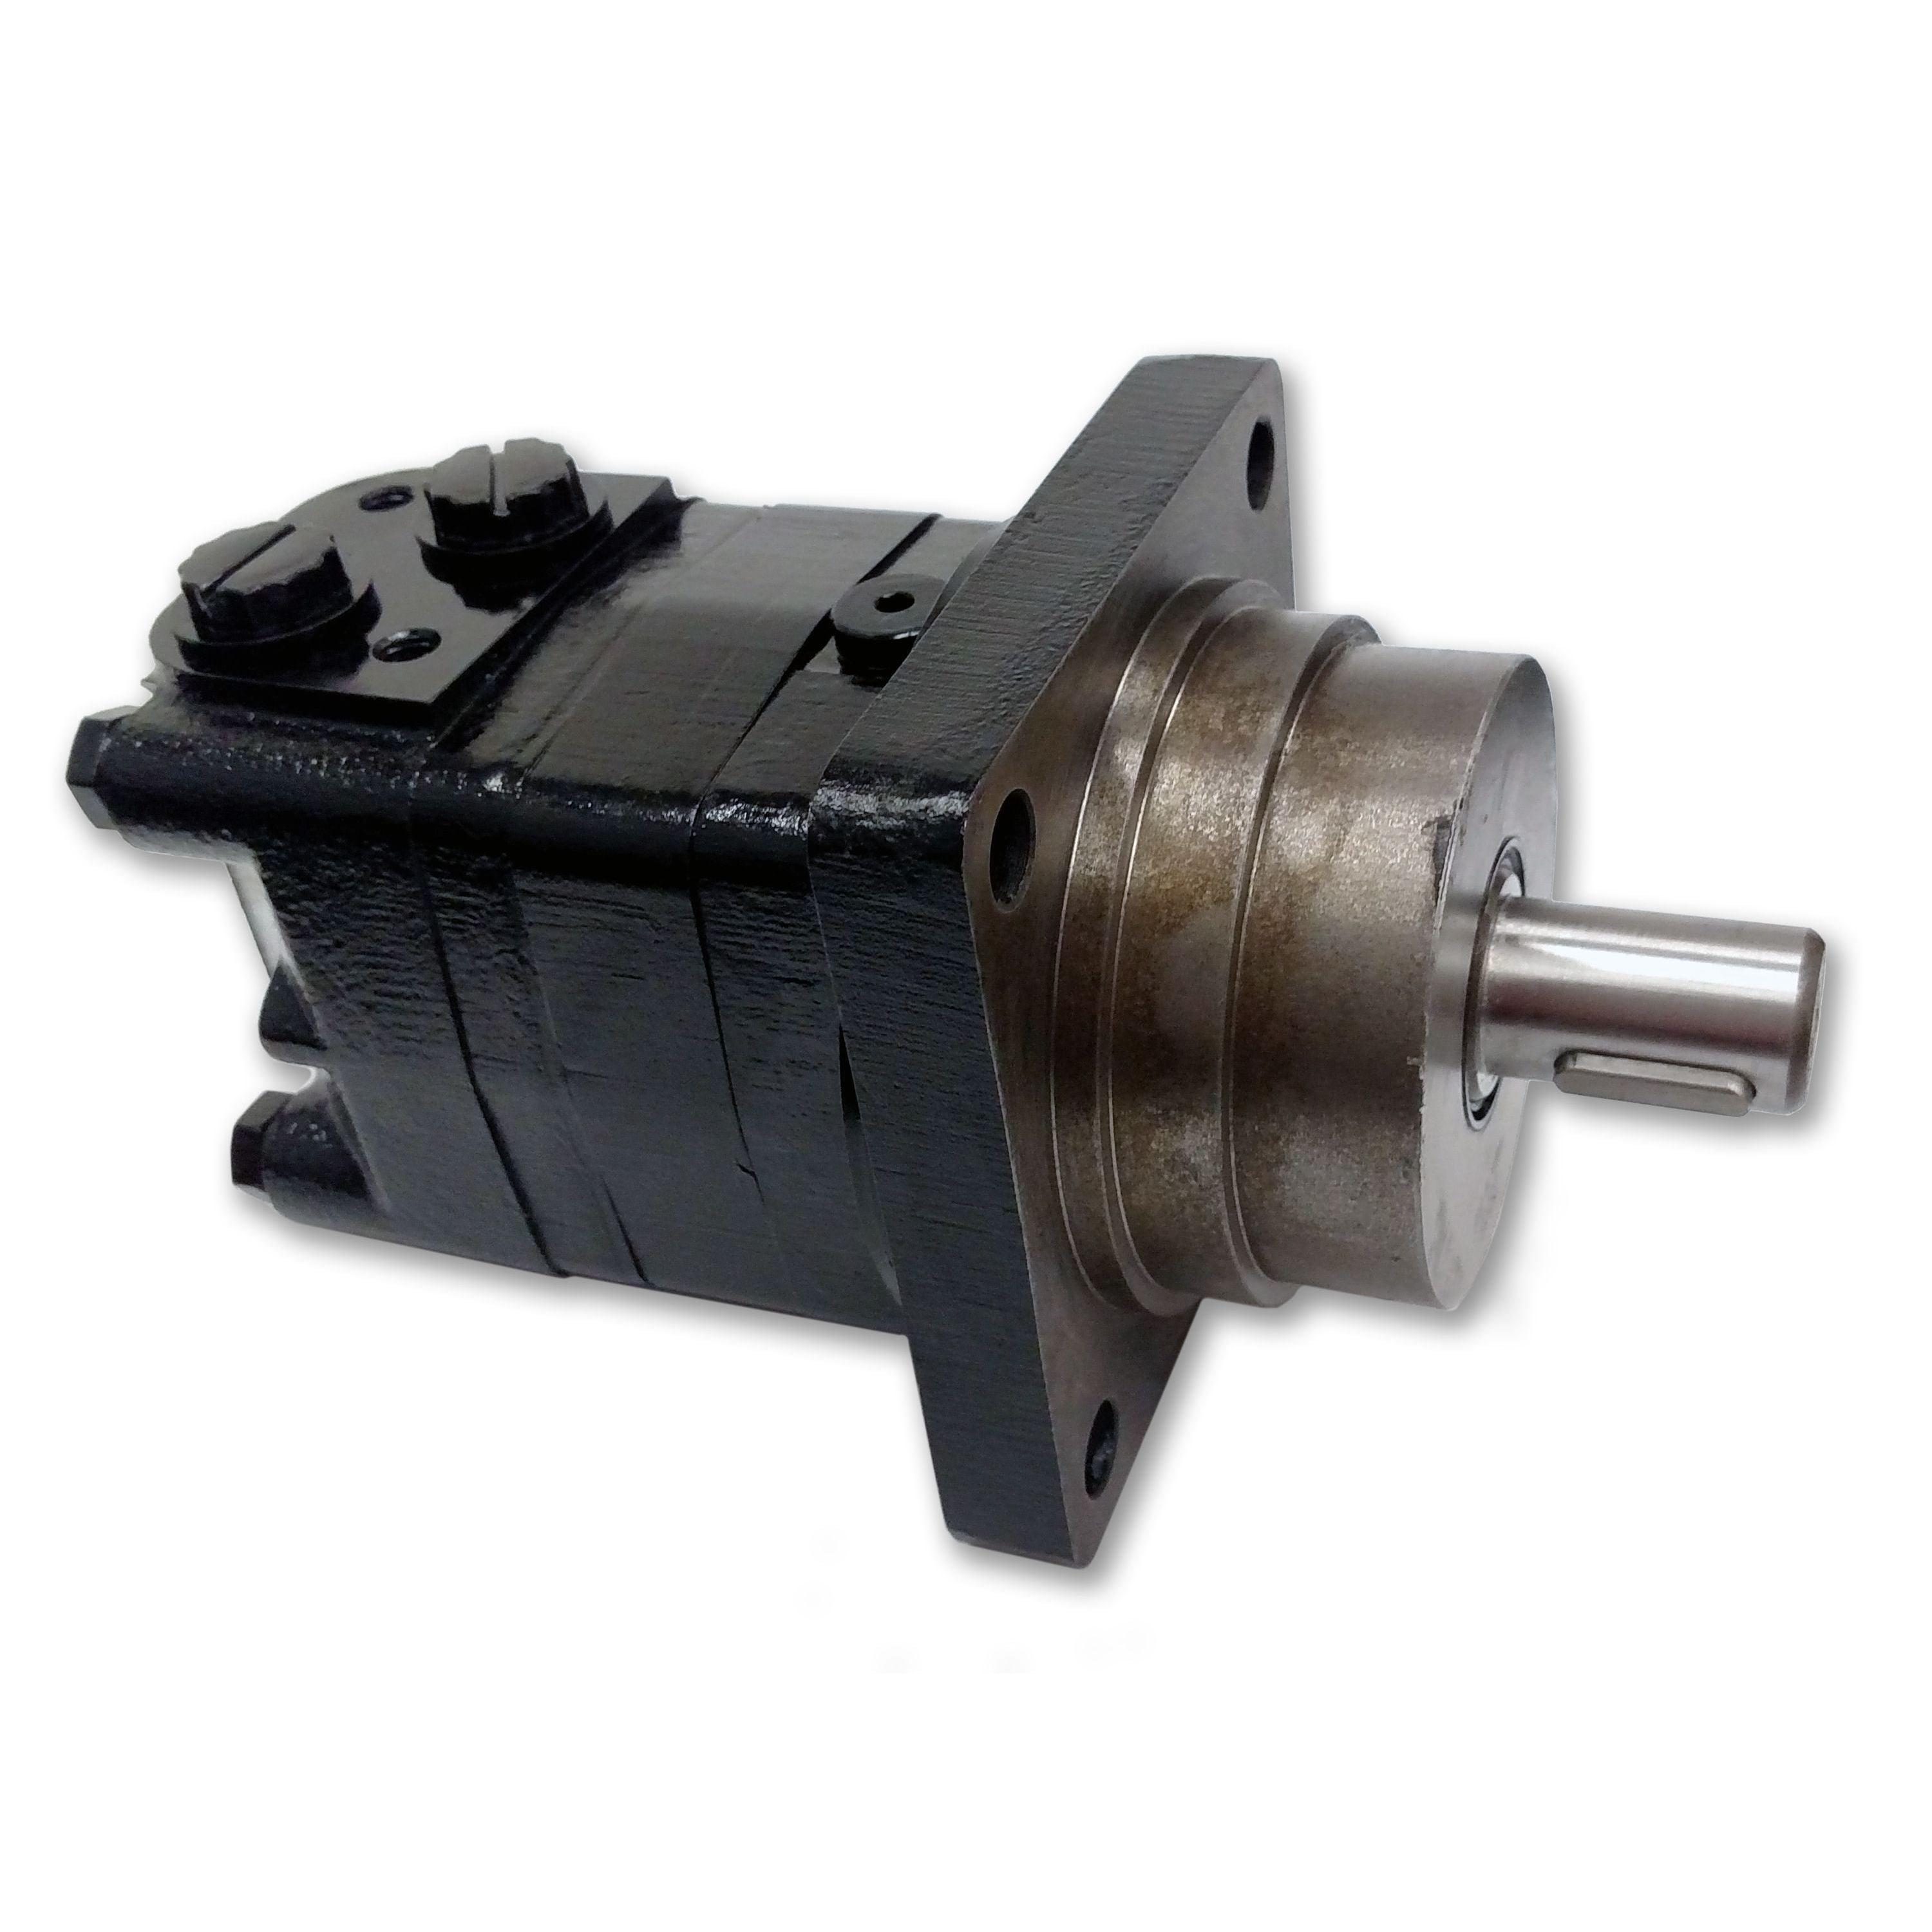 BMSY-400-WE-D-S : Dynamic LSHT Motor, 394cc, 185RPM, 7786in-lb, 2320psi Differential, 19.81GPM, Wheel Mount, 1" Bore x 1/4" Key Shaft, Side Ported, #10 SAE (5/8")